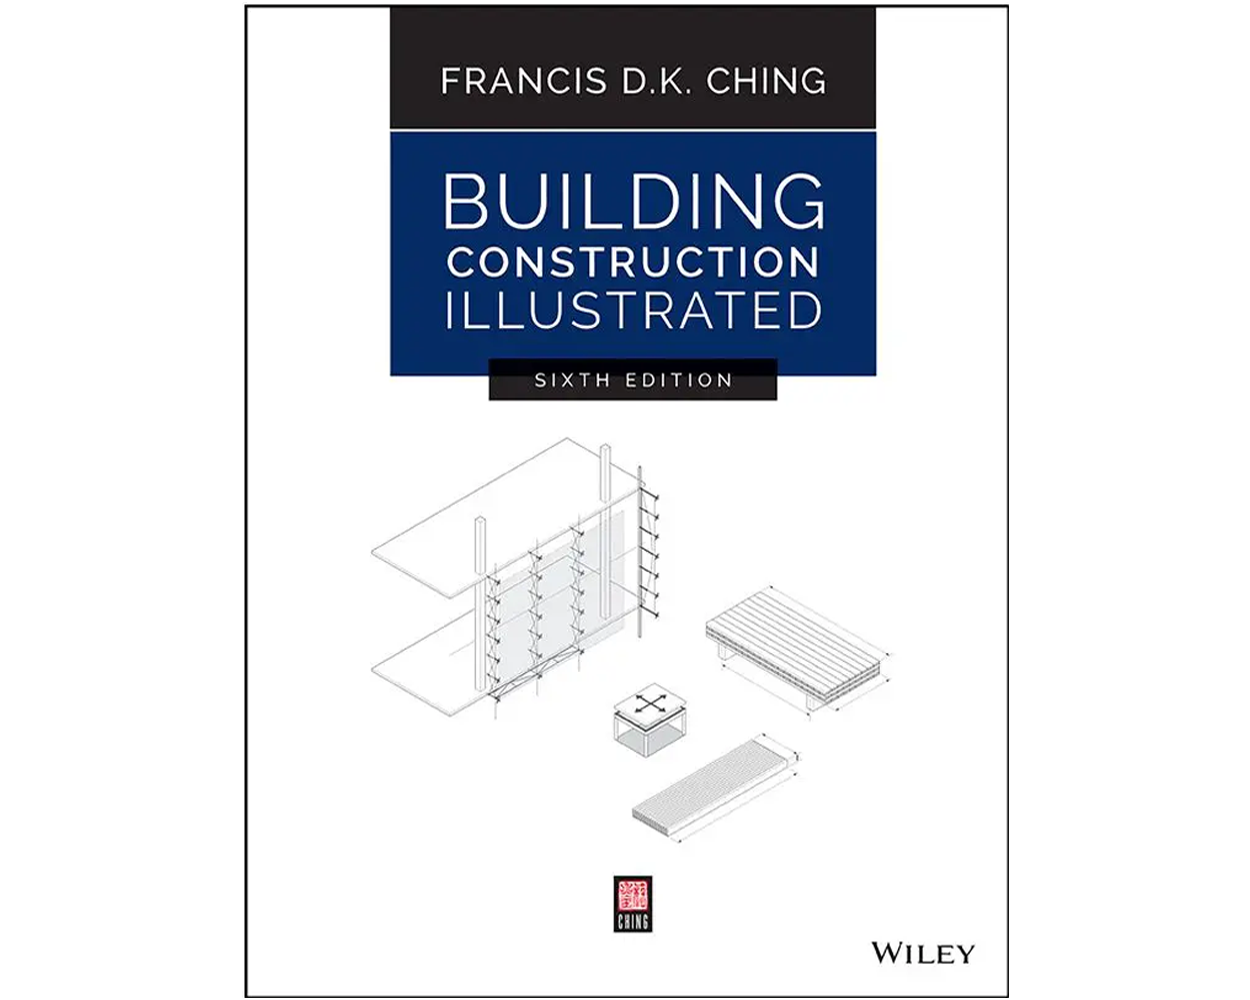 francis dk ching building construction illustrated pdf download